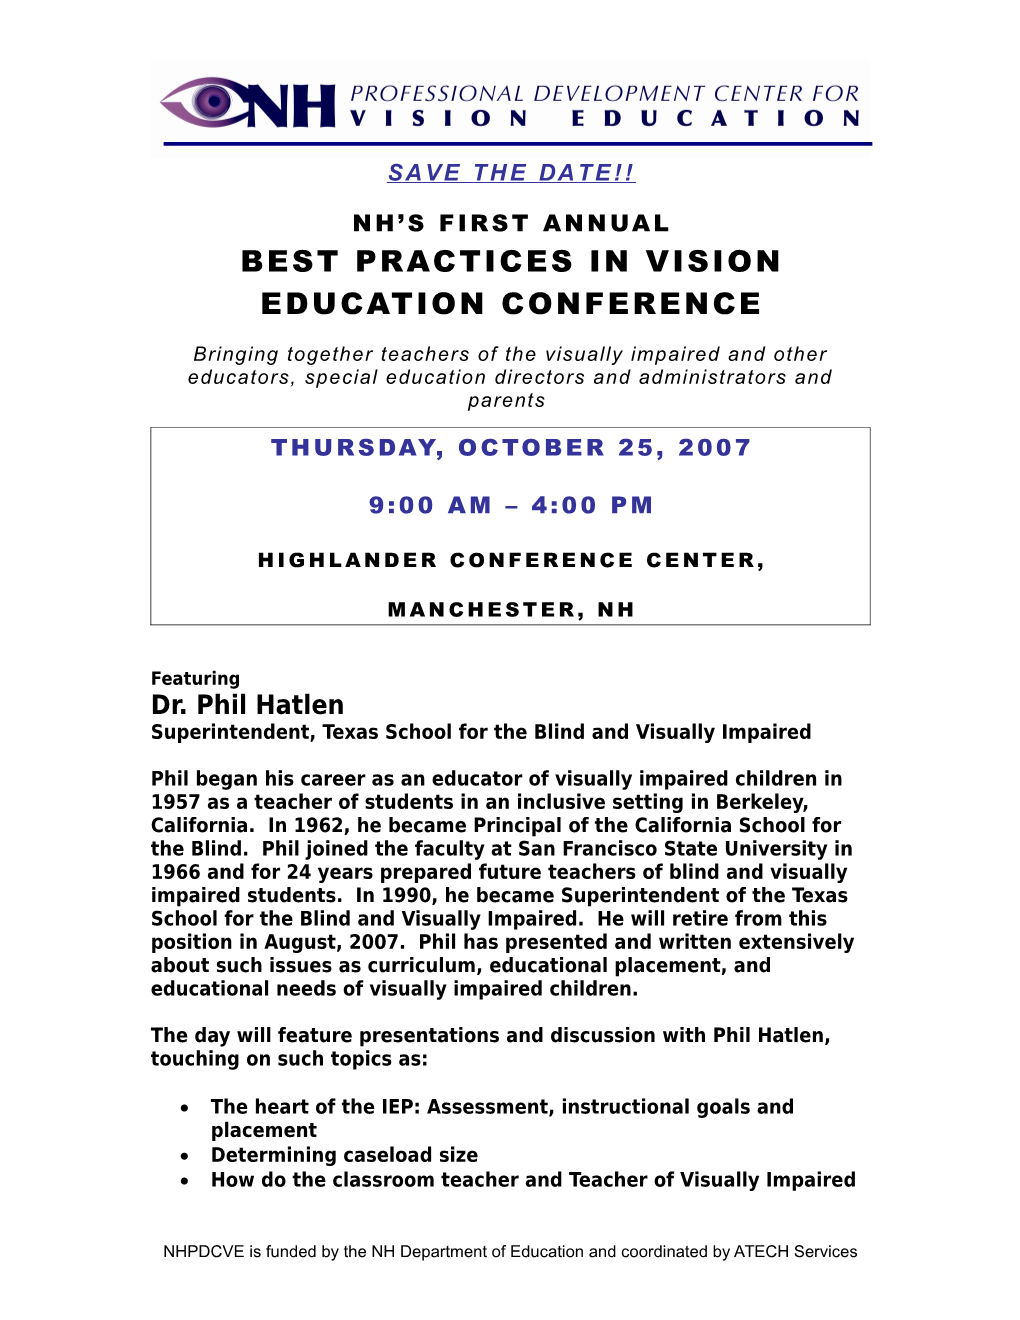 Best Practices in Vision Education